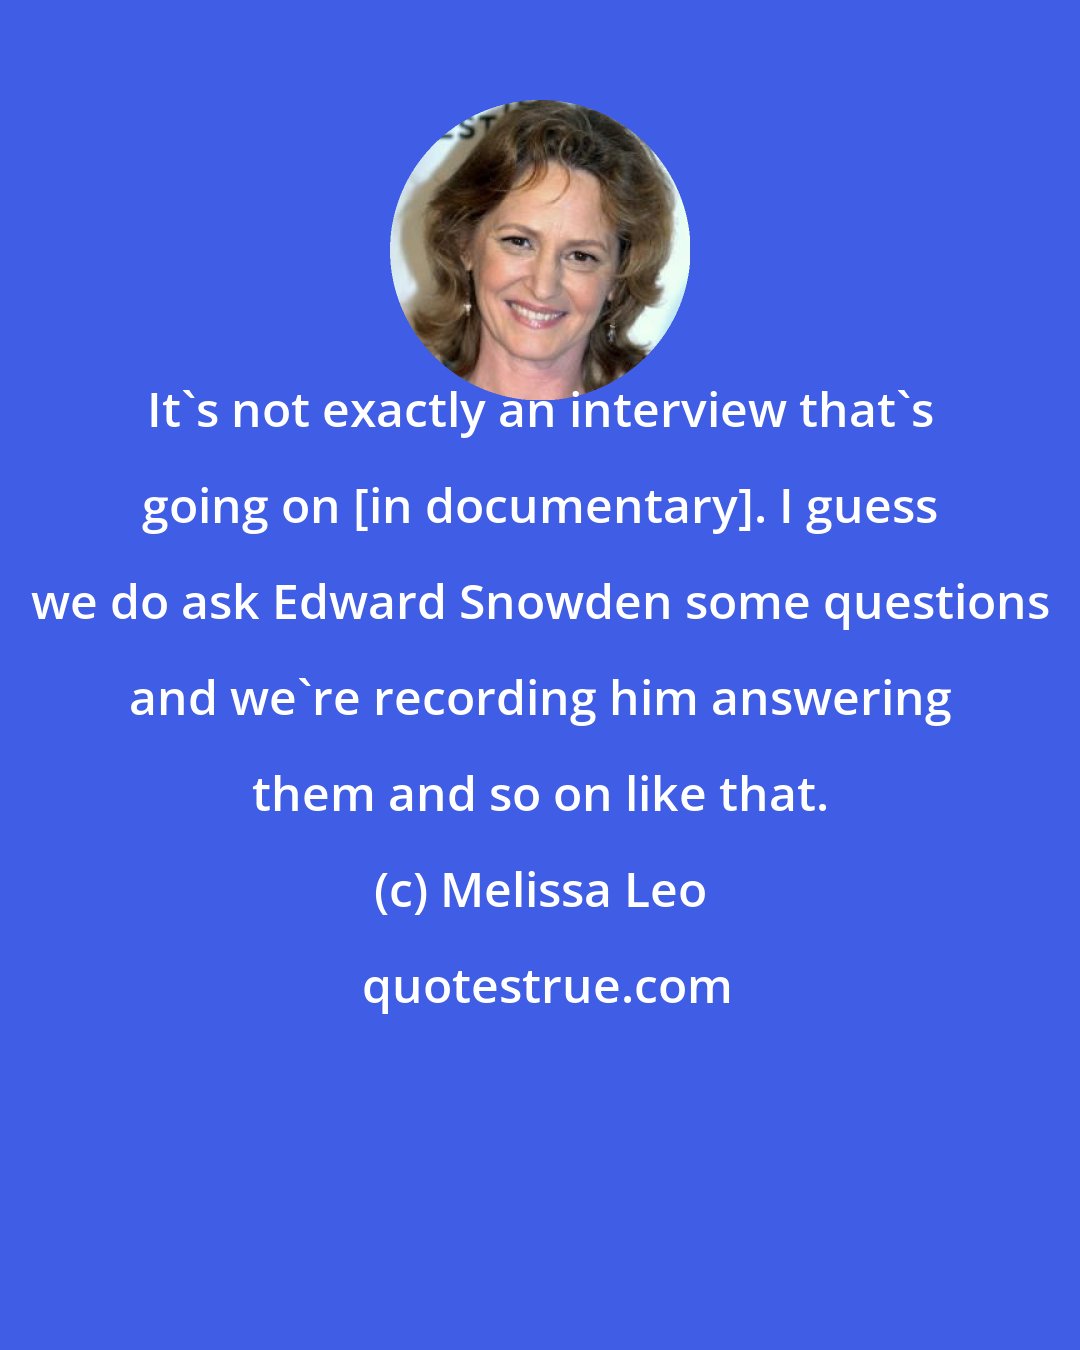 Melissa Leo: It's not exactly an interview that's going on [in documentary]. I guess we do ask Edward Snowden some questions and we're recording him answering them and so on like that.